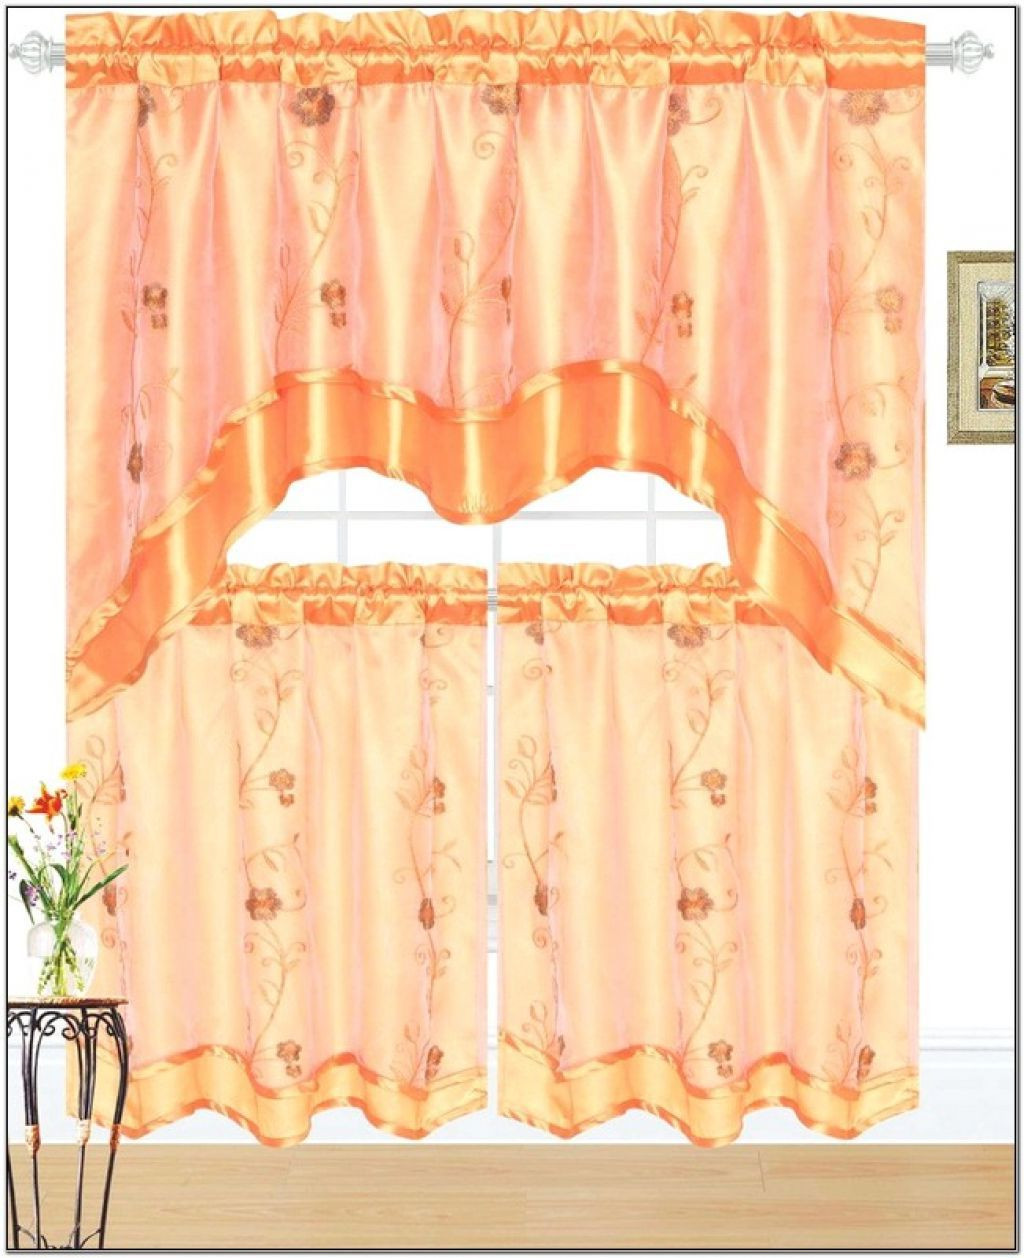 Kitchen Curtains At Jcpenney
 Jcpenney Kitchen Curtain – stylish Drape for Cooking Space